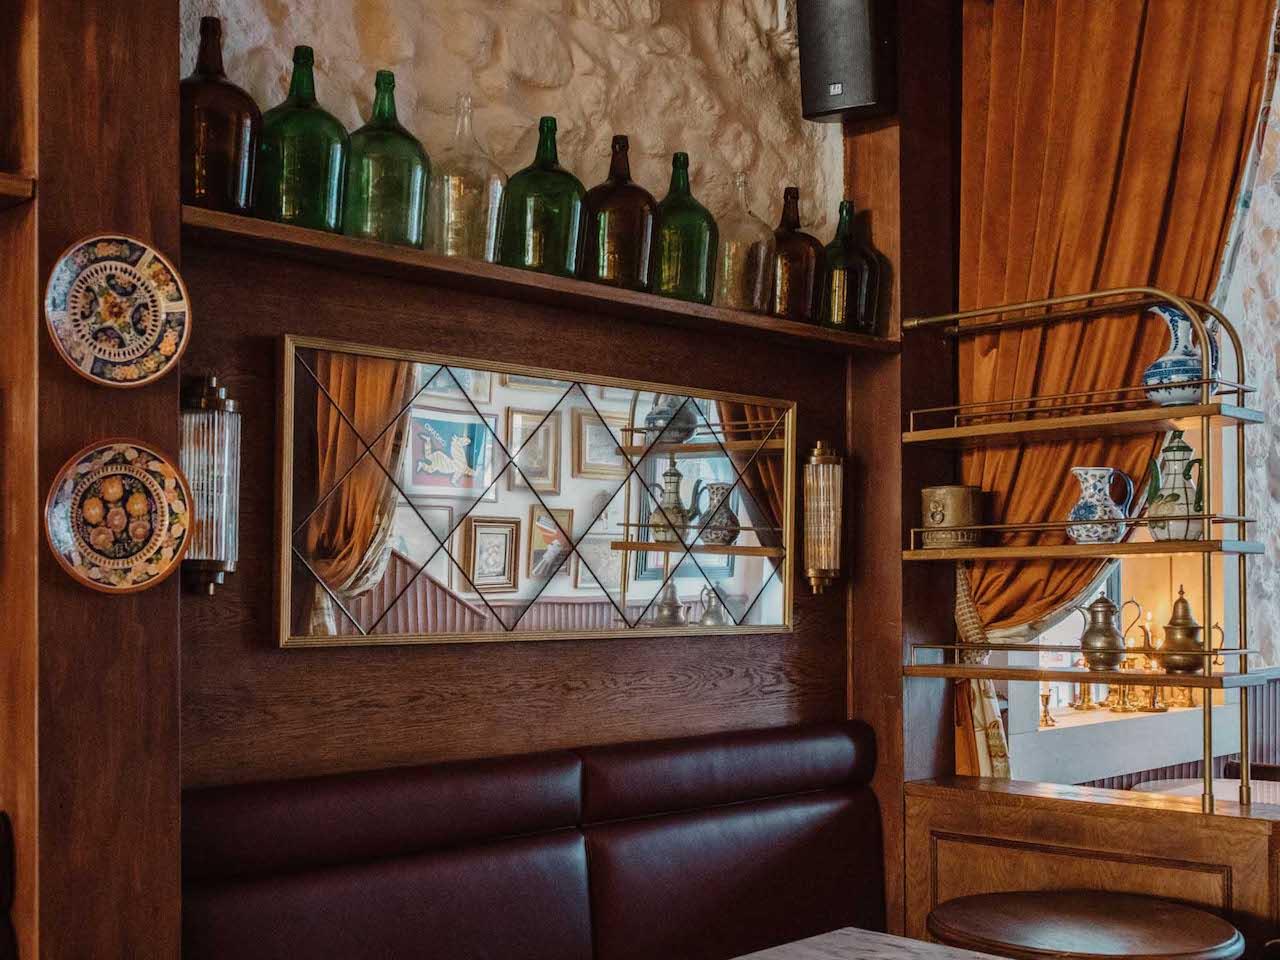 More is More in this Vintage Lisbon Restaurant